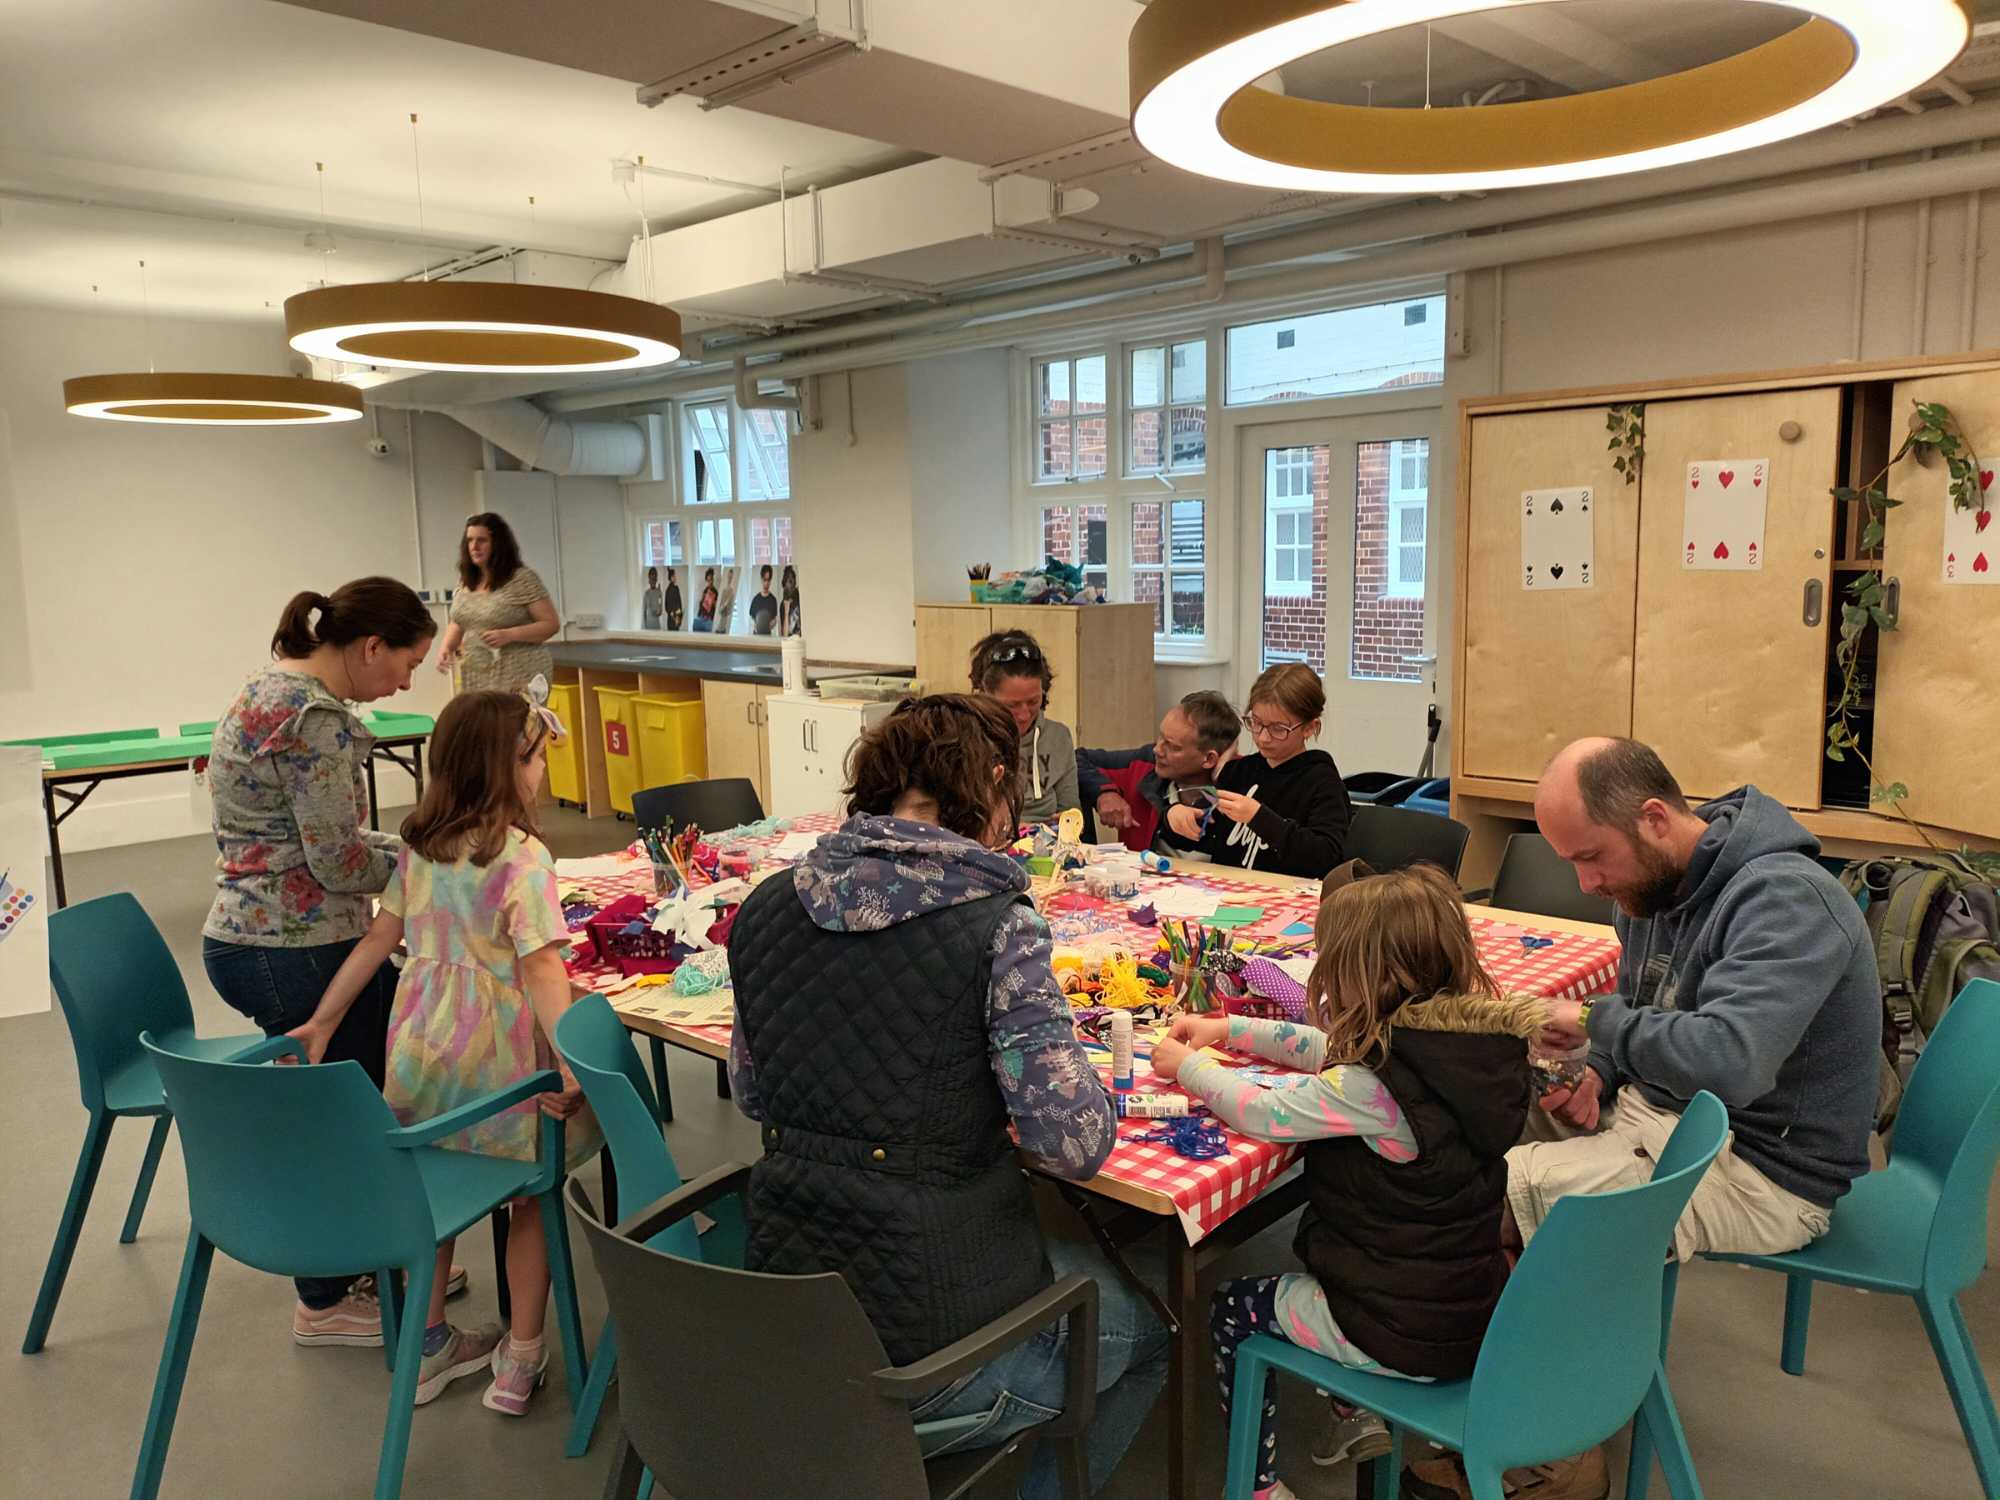 A group of children and adults sit around a large table and engage in craft activities.